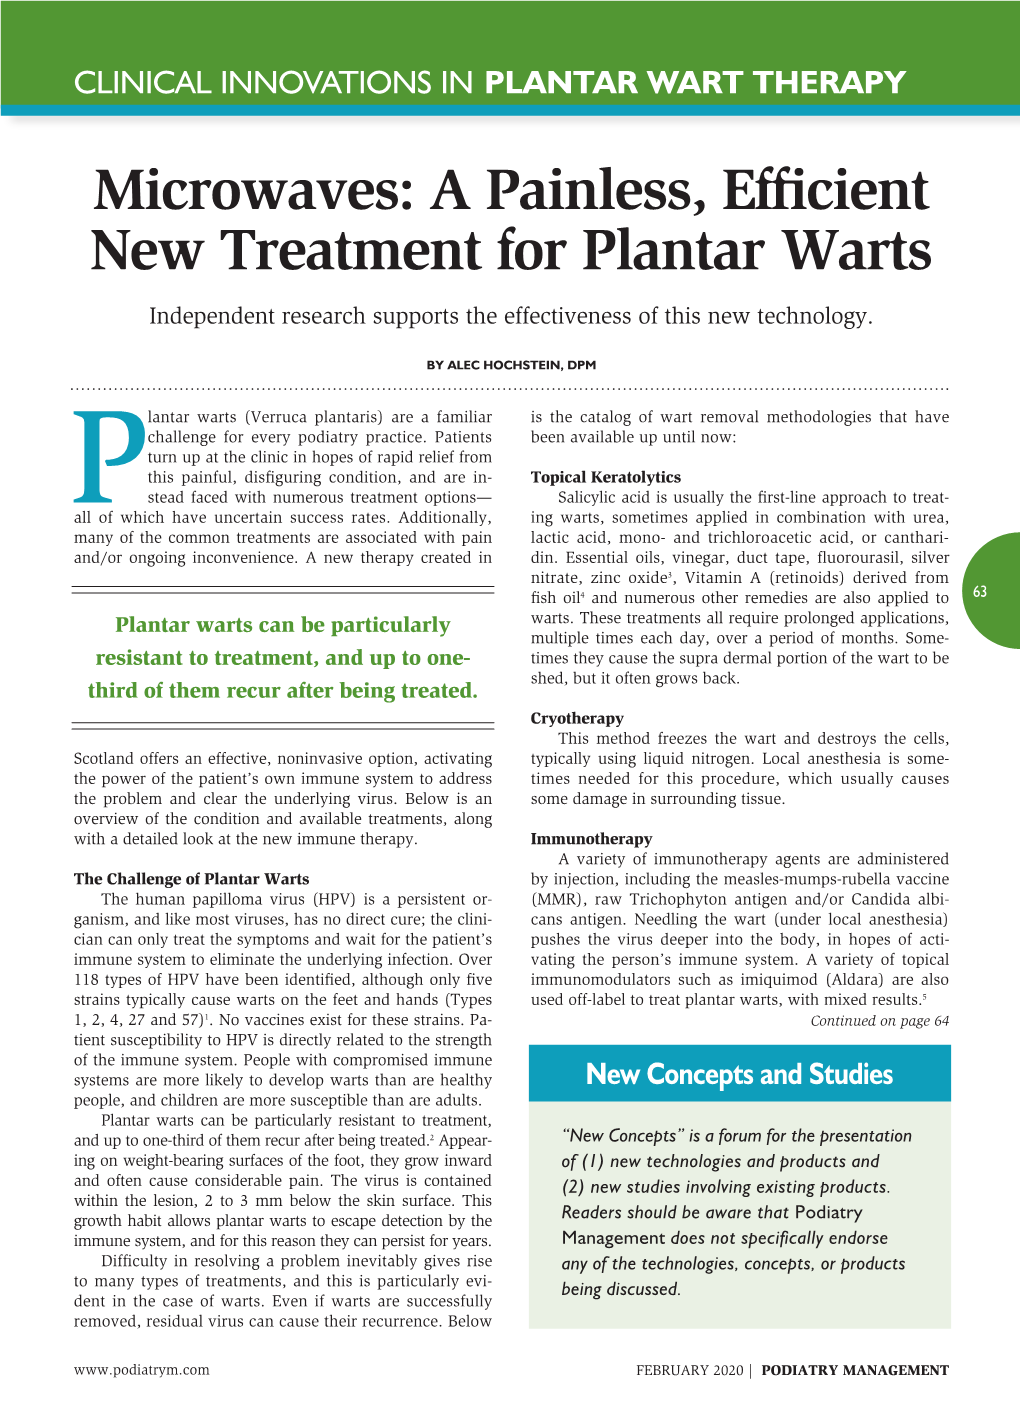 Microwaves: a Painless, Efficient New Treatment for Plantar Warts Independent Research Supports the Effectiveness of This New Technology